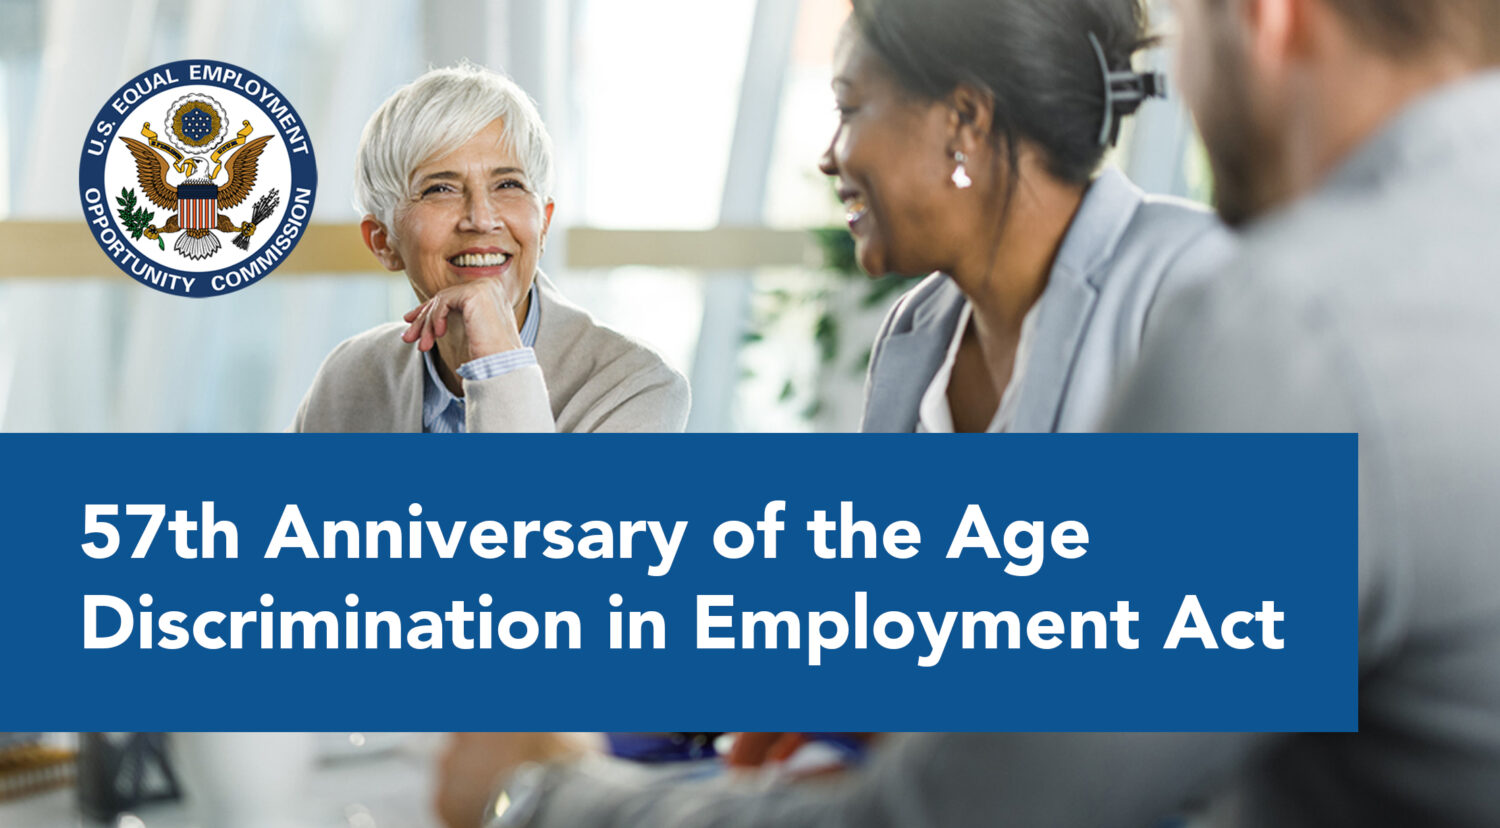 Blog_Celebrating the 57th Anniversary of the Age Discrimination in Employment Act (ADEA).